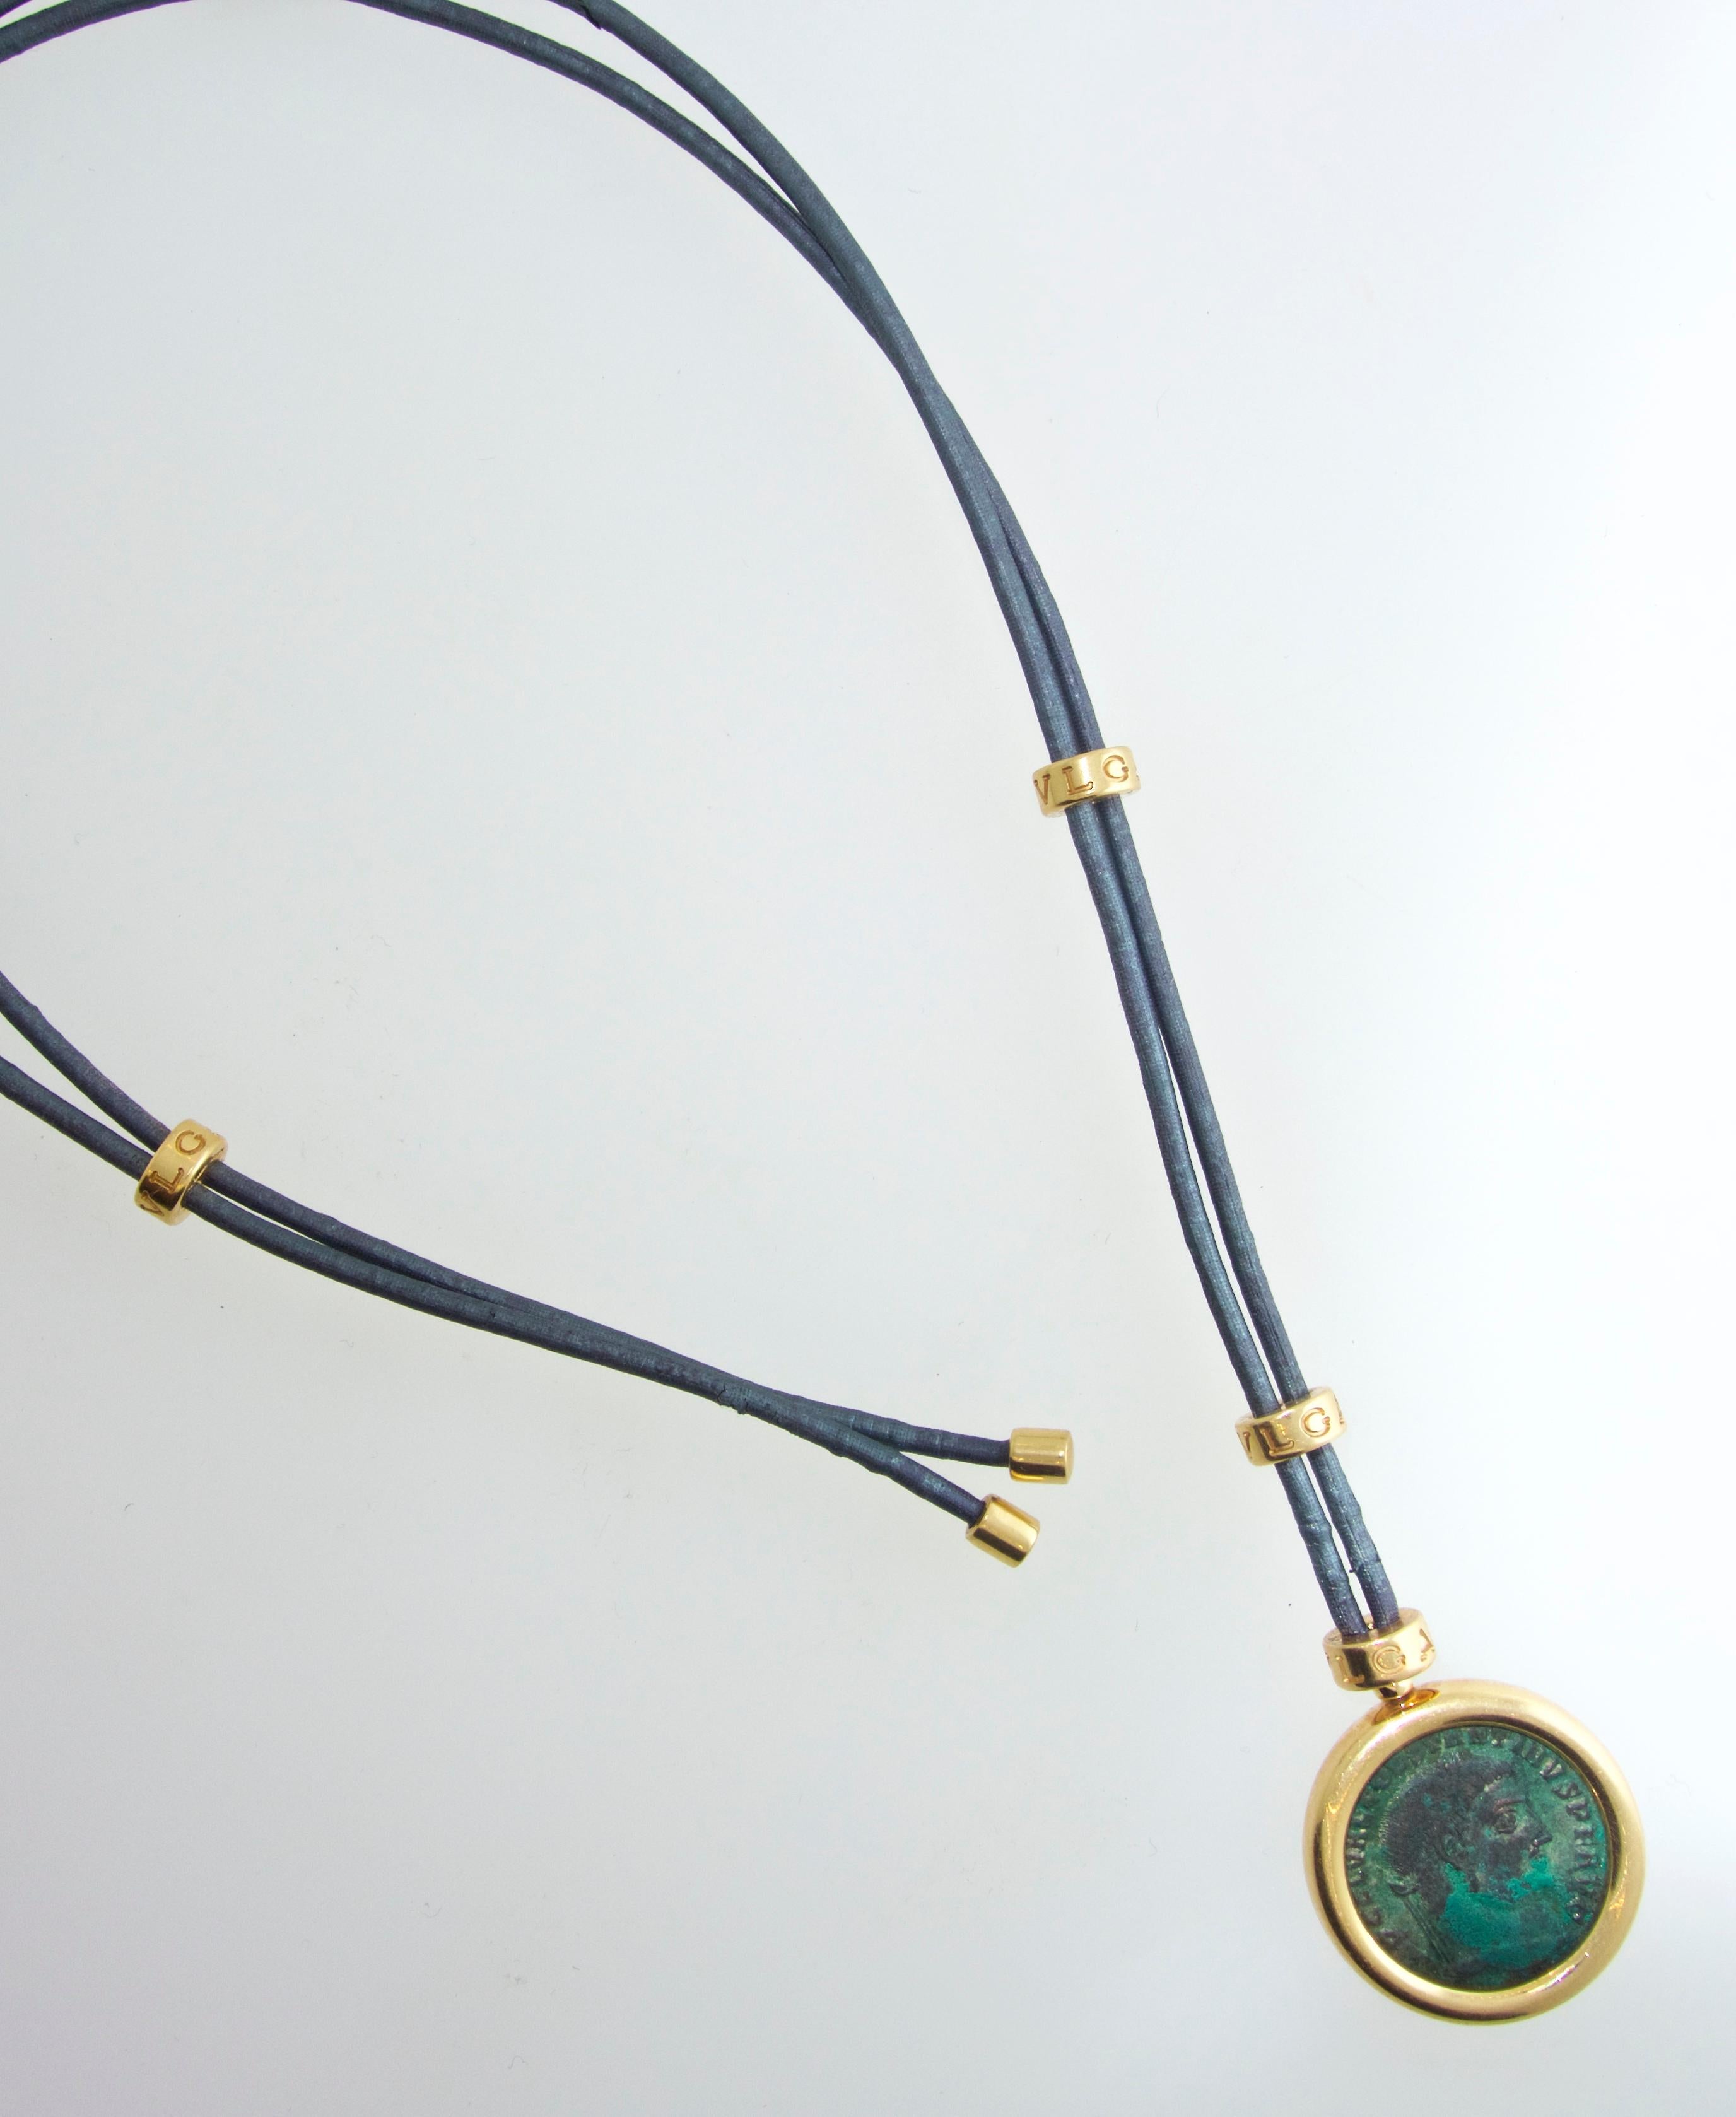 This Bulgari necklace centers an ancient coin  in fine condition and in an 18K gold bezel which is inscribed by Bulgari with the coin's description: Nicomedia-Constantinas Aug. AD 307-337.   This necklace is by the famous Italian house Bulgari and